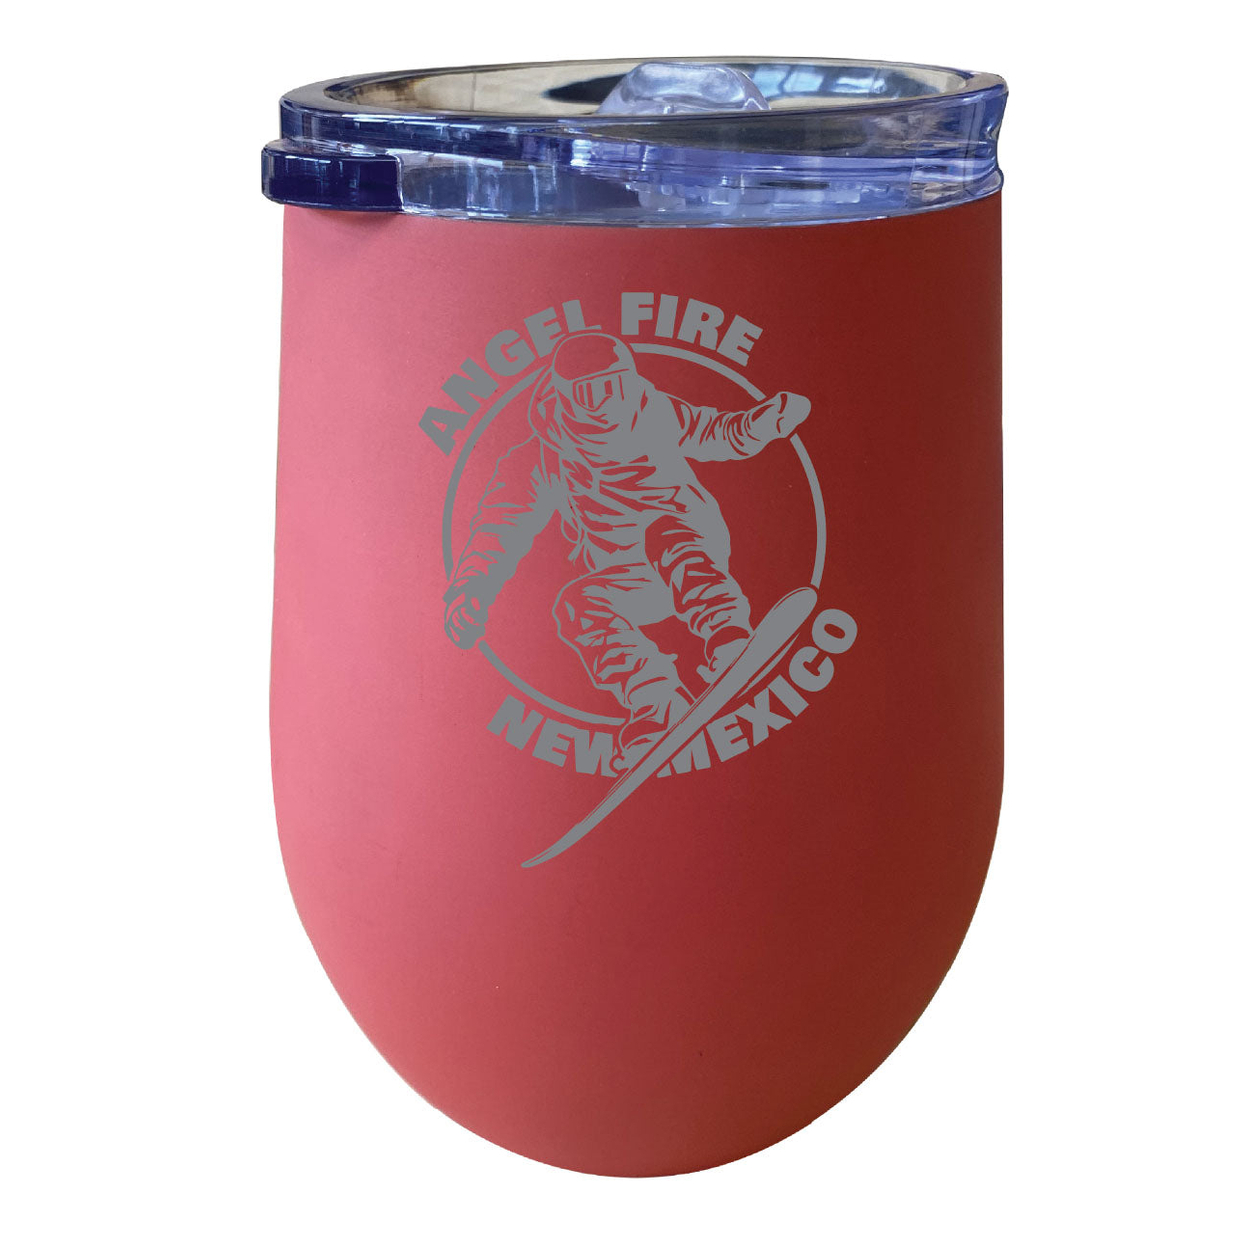 Angel Fire New Mexico Souvenir 12 Oz Engraved Insulated Wine Stainless Steel Tumbler - Coral,,2-Pack